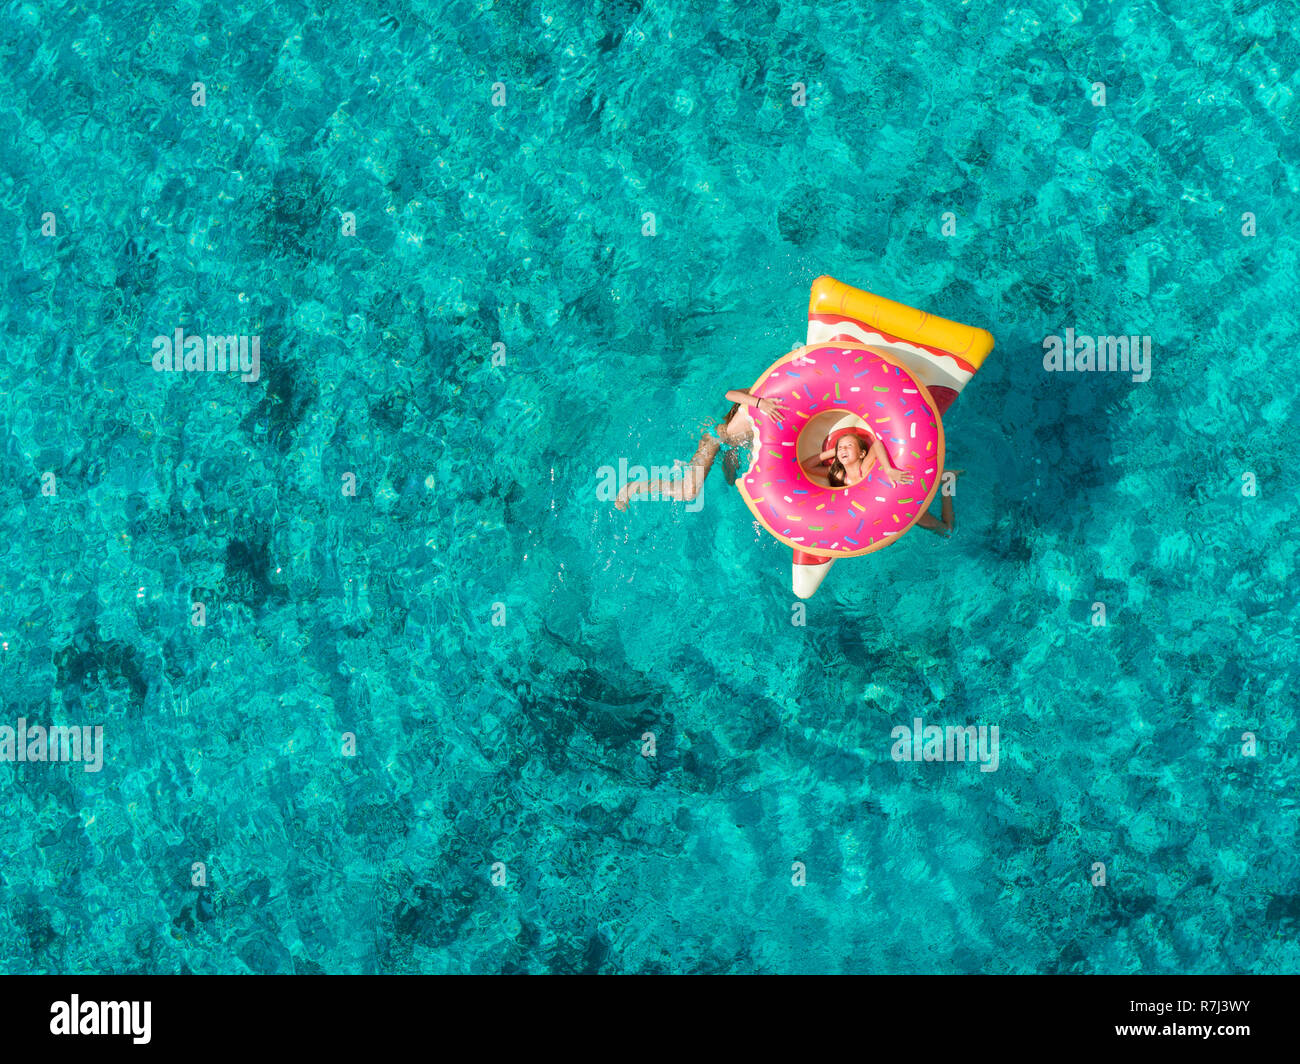 Aerial view of two young girls playing in sea on pizza and donut shaped inflatables. Stock Photo